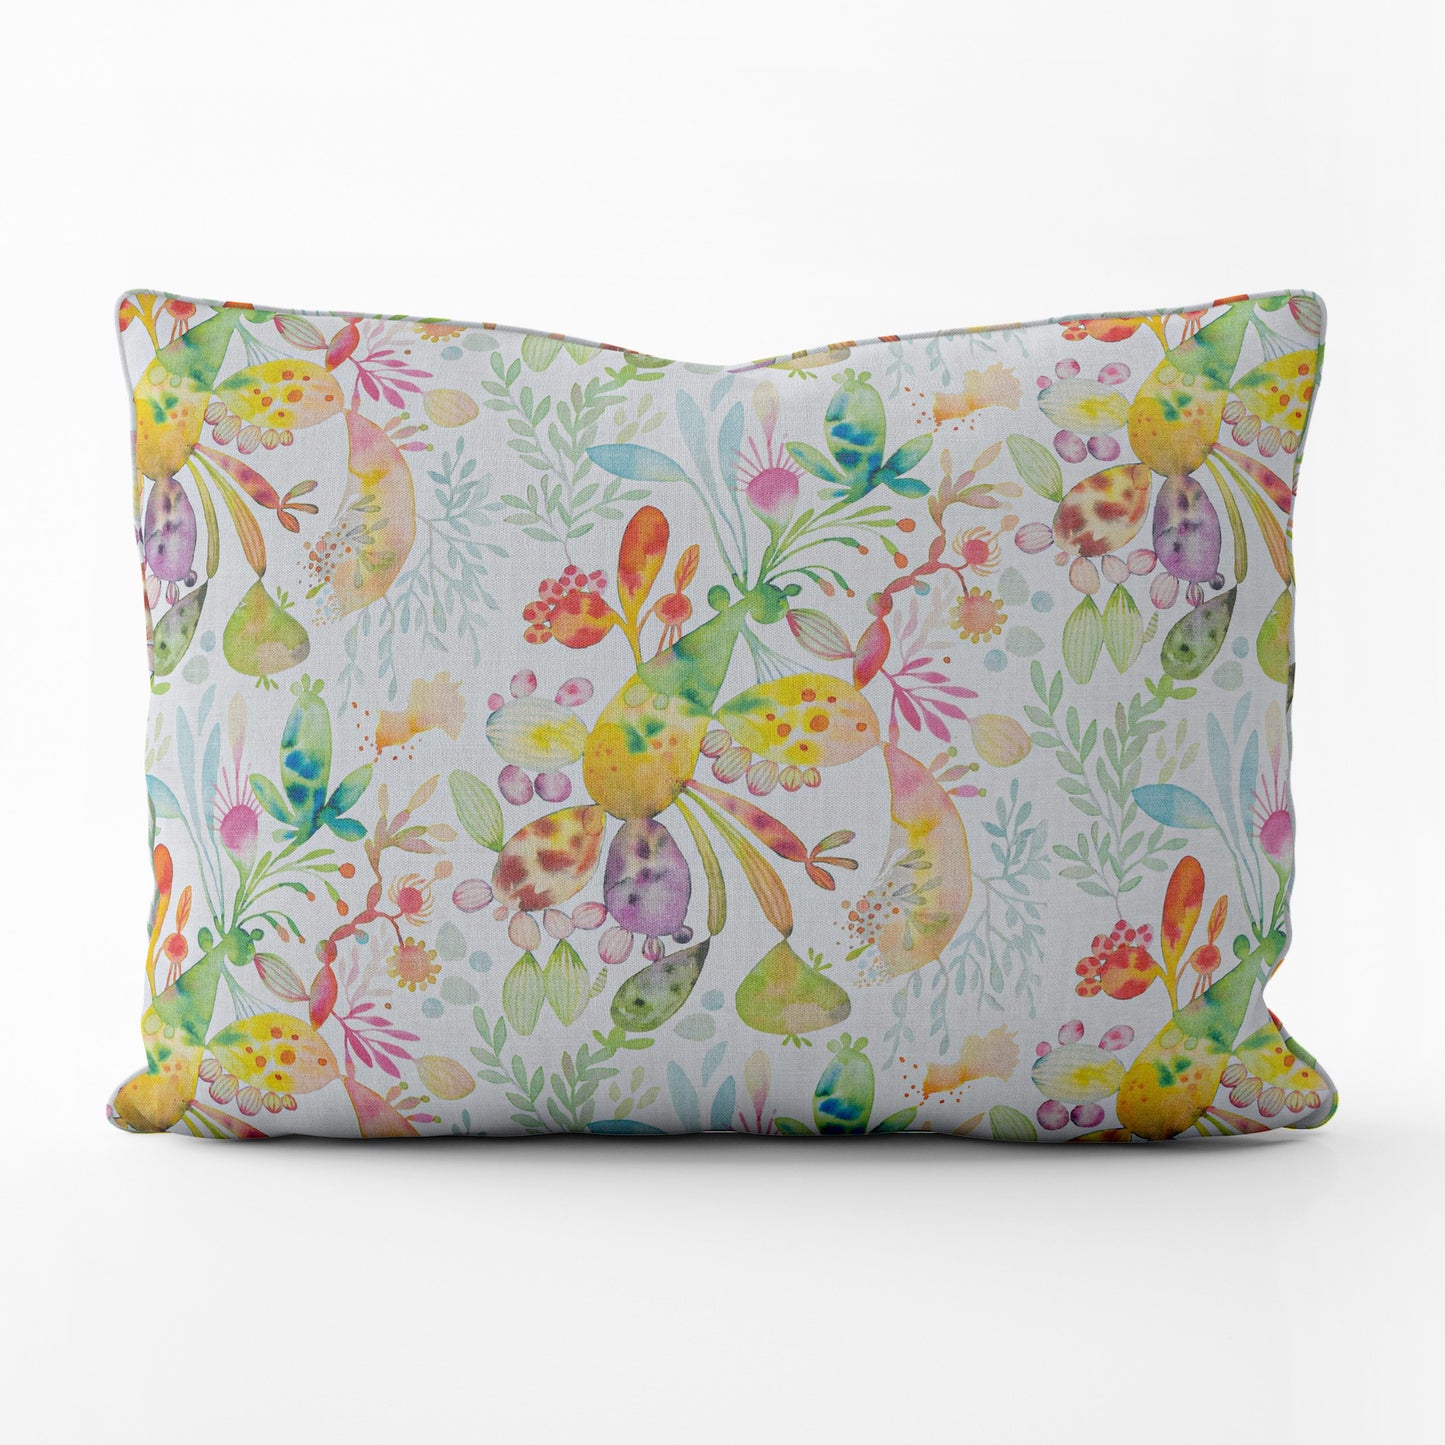 Decorative Pillows in Kowtow Multi-Color Bright Abstract Watercolor- Blue, Green, Yellow, Pink